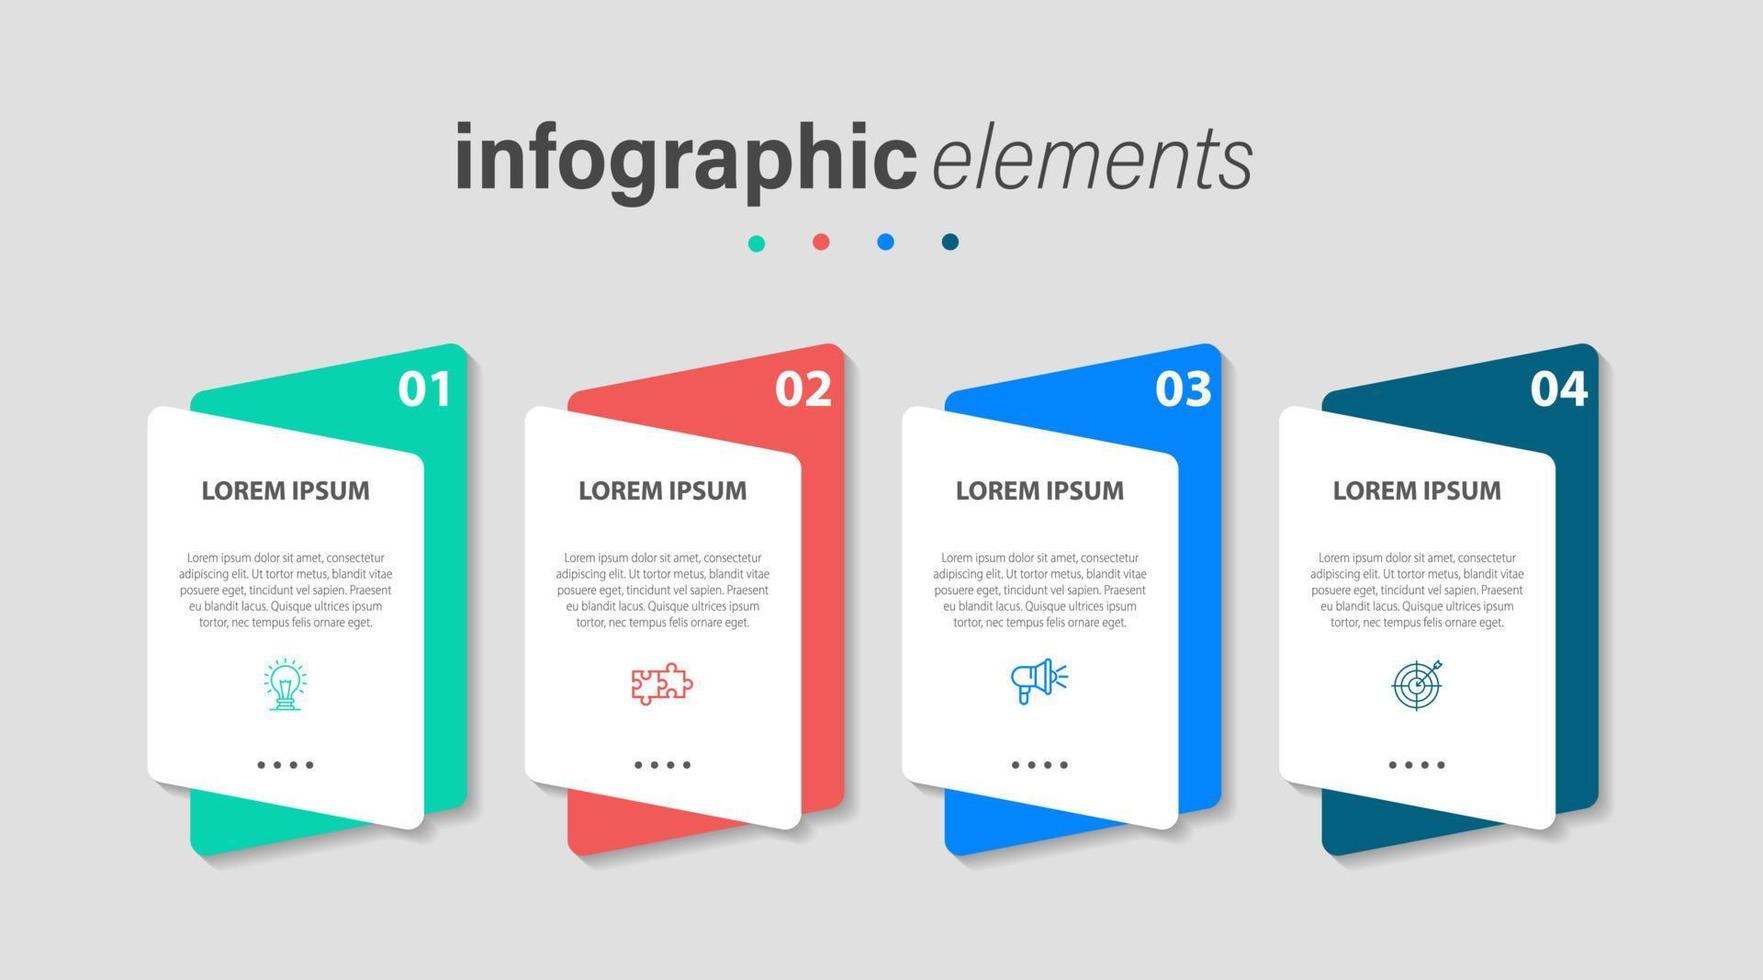 Business infographic elements template design with icons and 4 options or steps. Vector illustration.